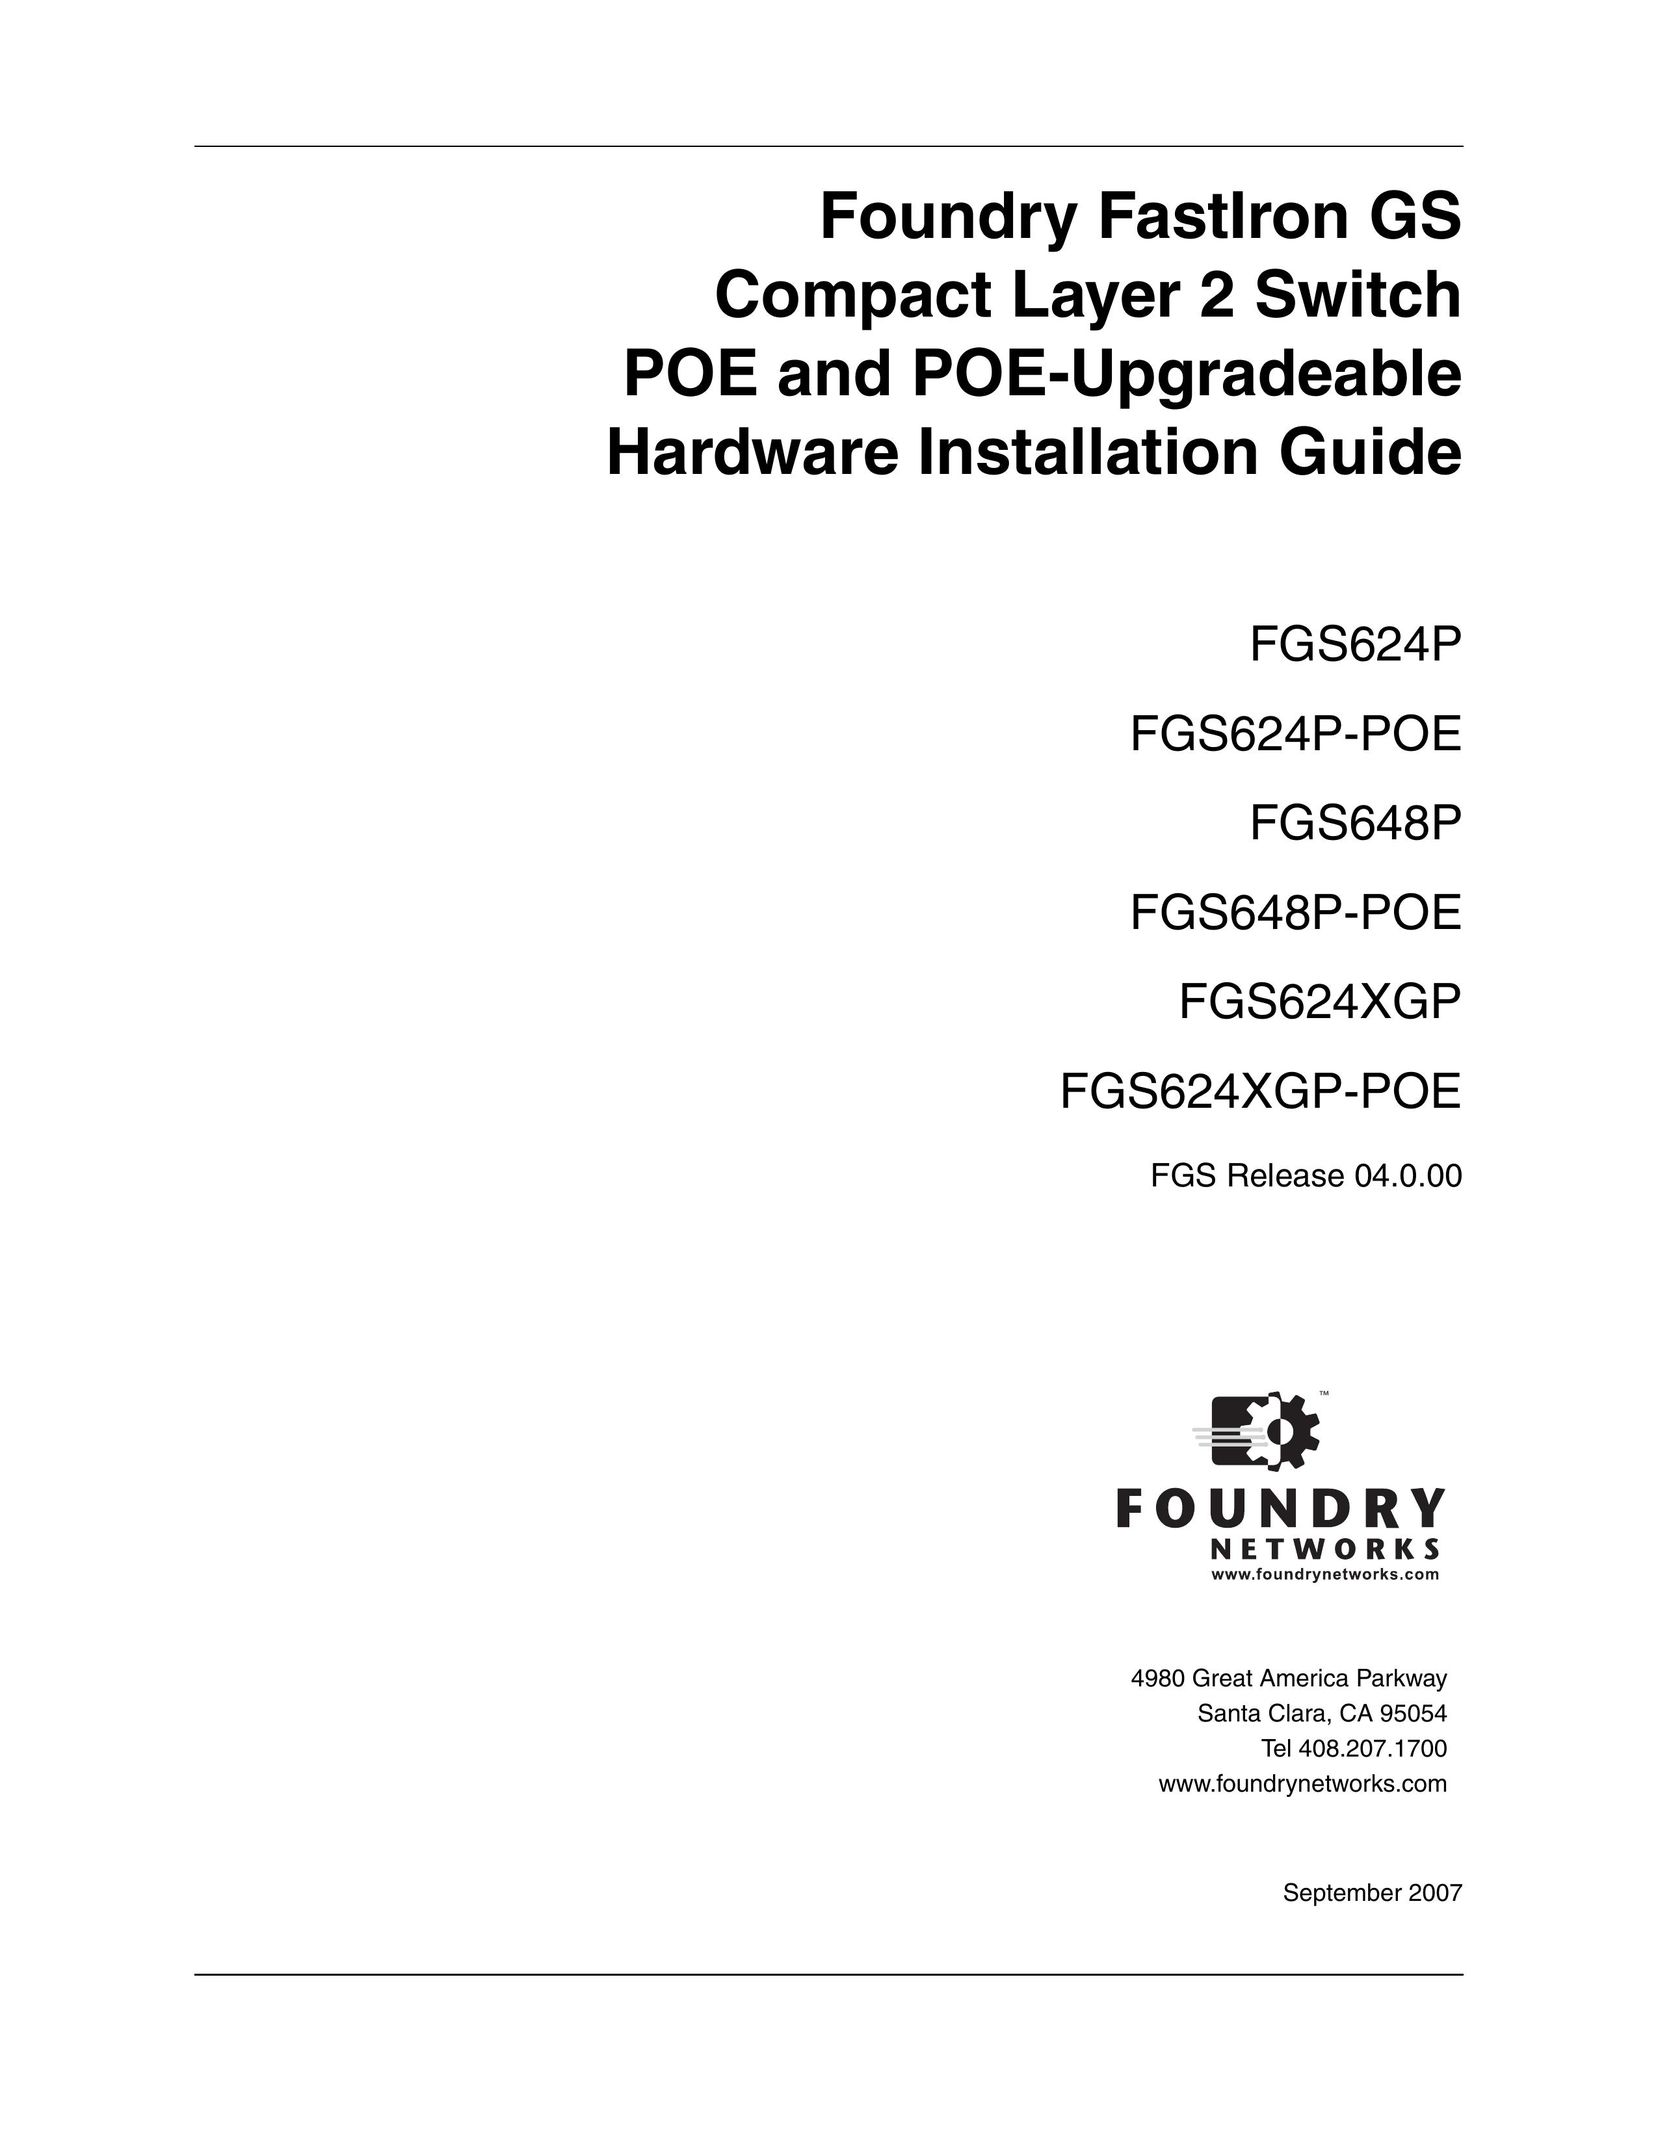 Foundry Networks FGS648P Network Hardware User Manual